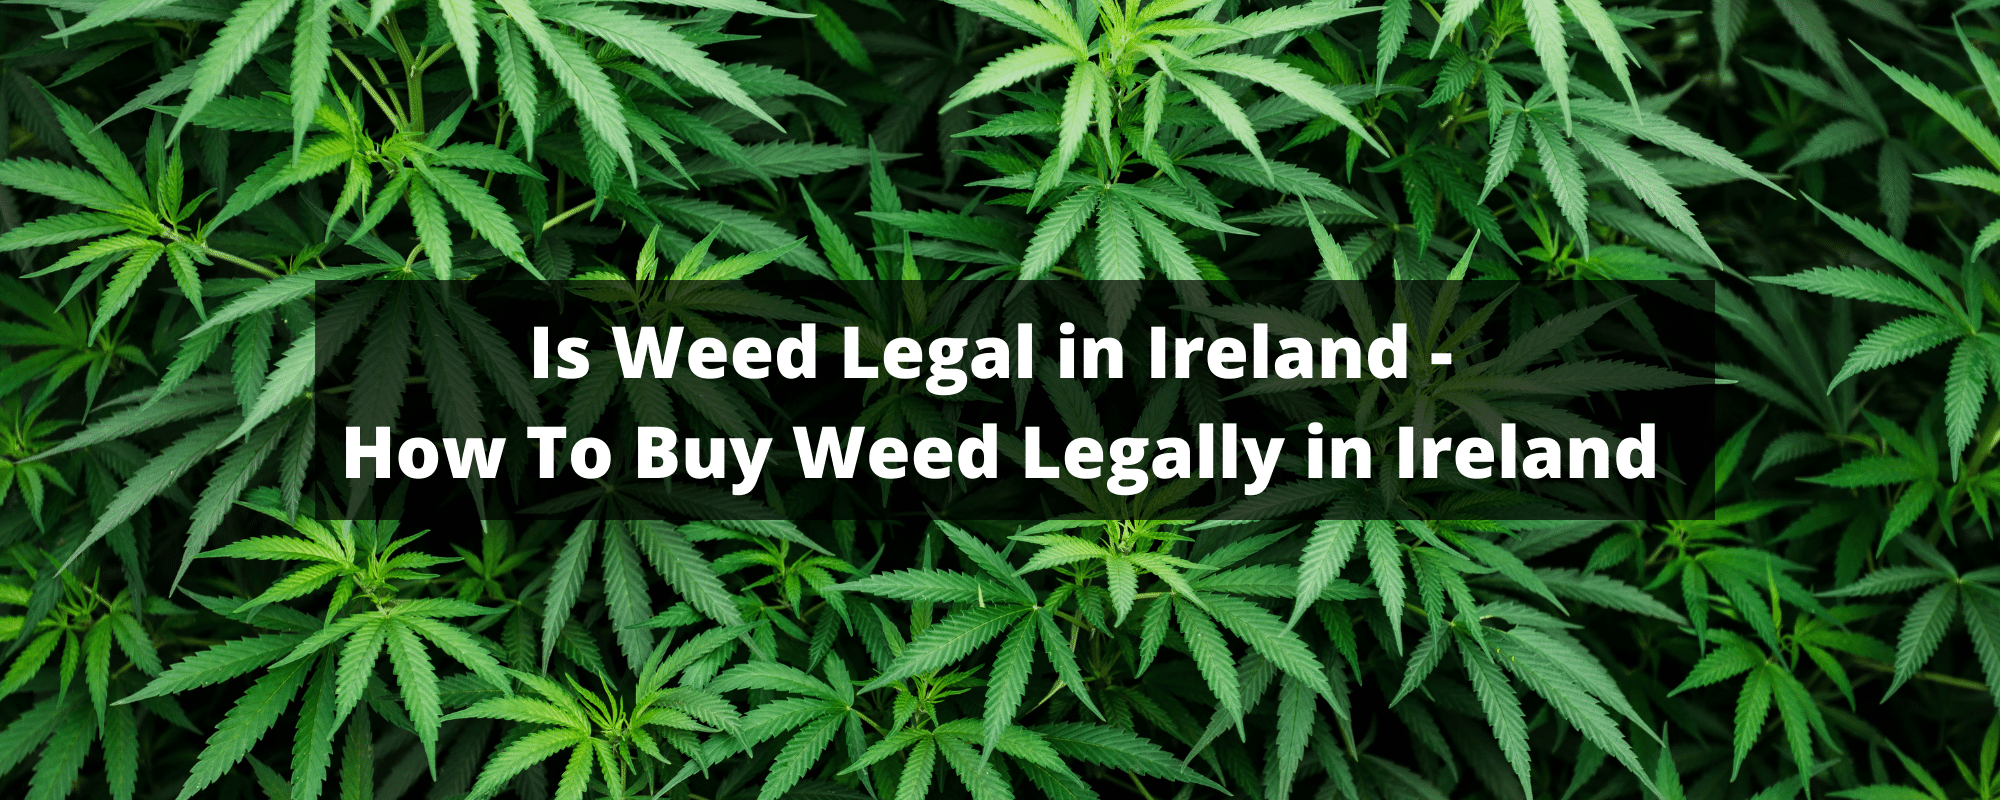 is weed legal in ireland